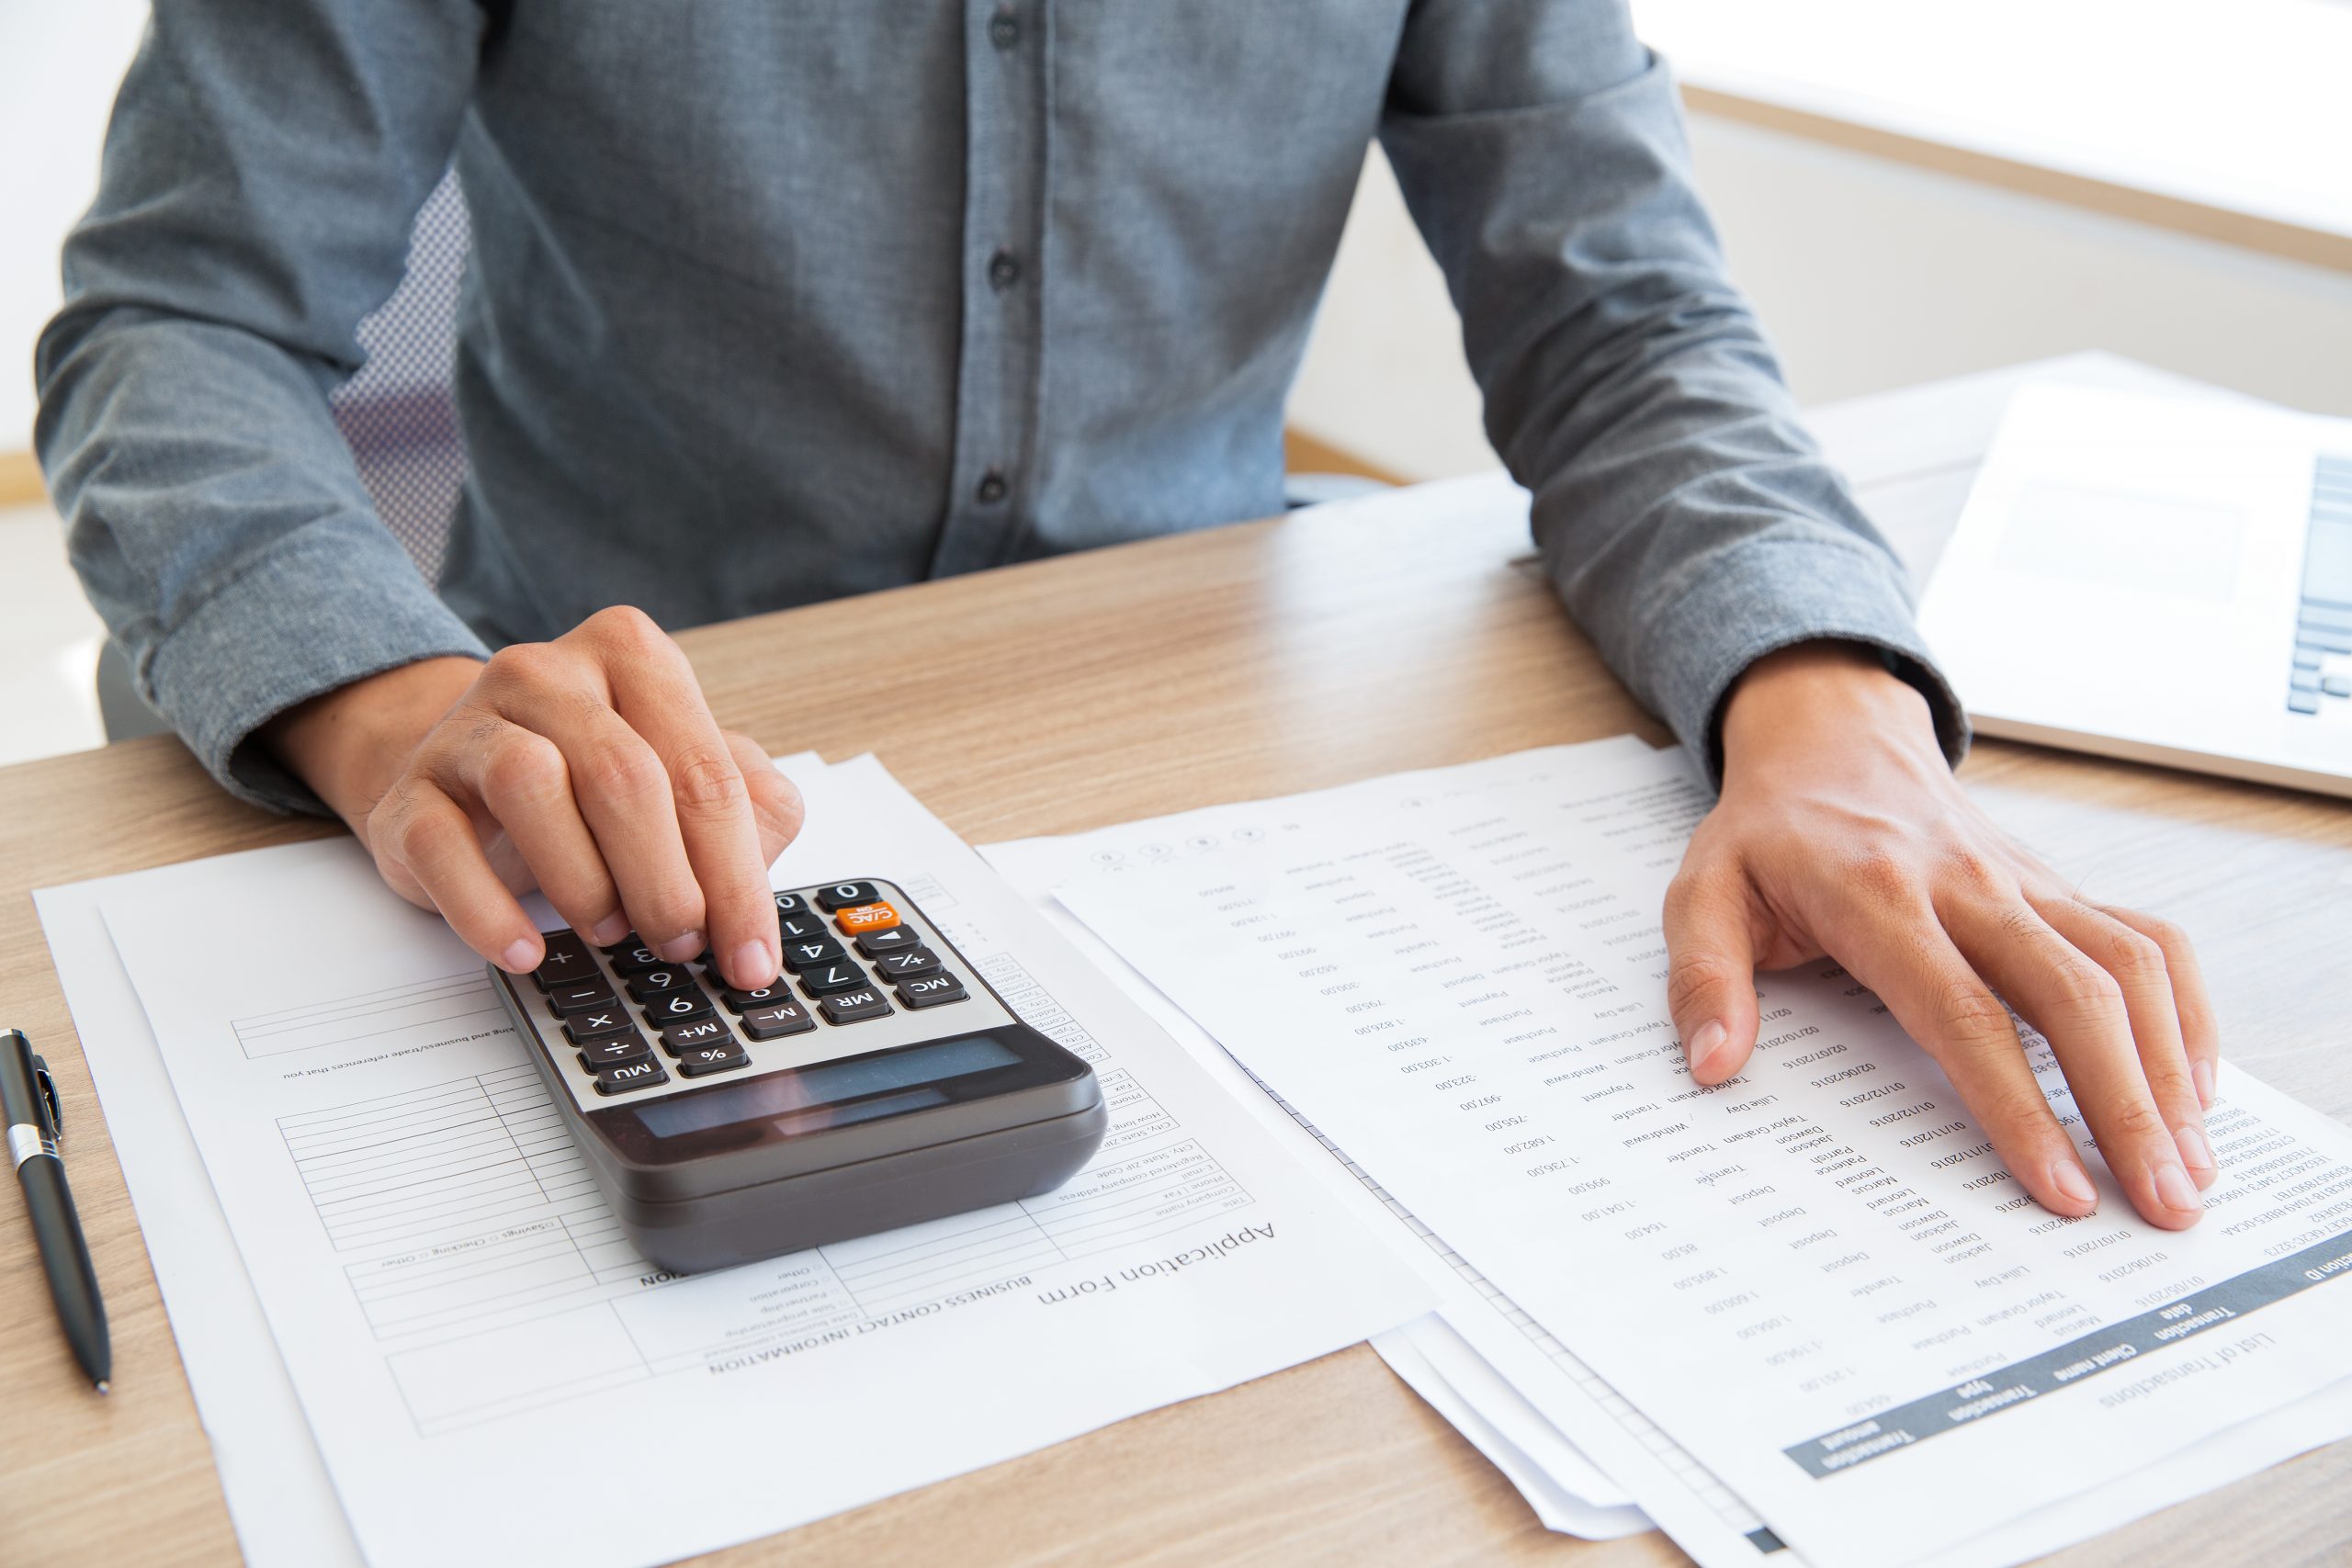 Calculating company tax and examining report